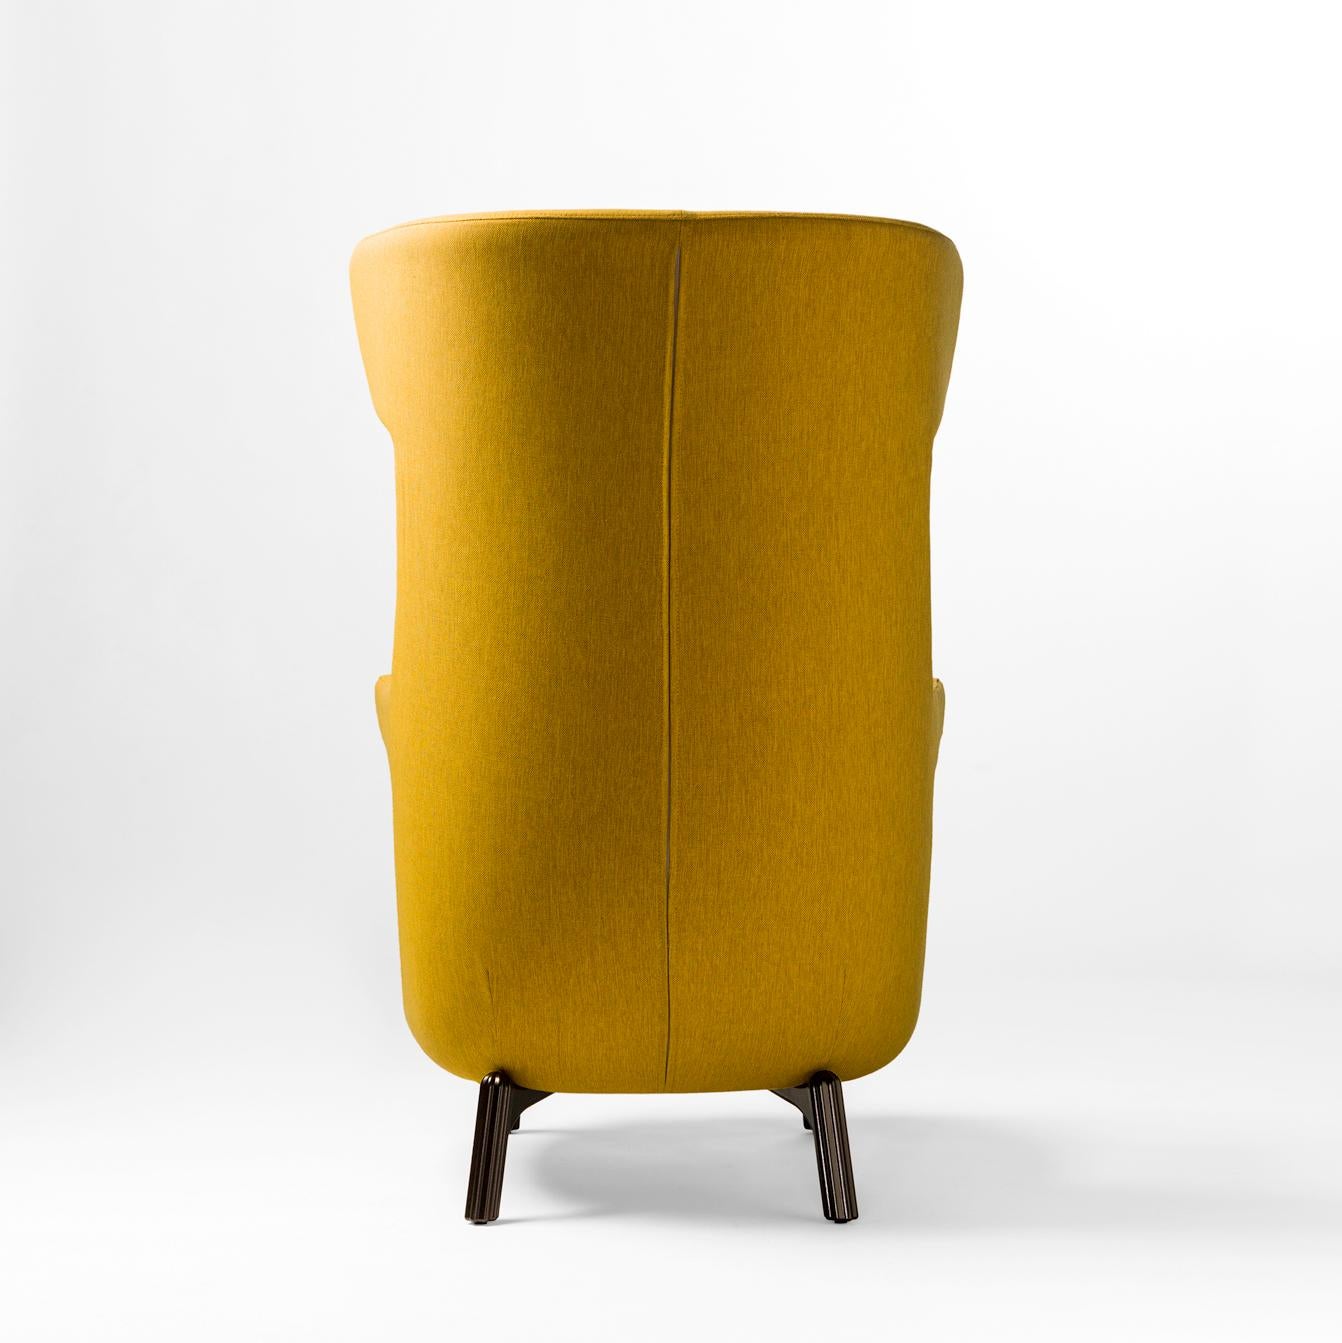 Spanish Jaime Hayon, Contemporary, Monocolor in Yellow Fabric Upholstery Dino Armchair For Sale